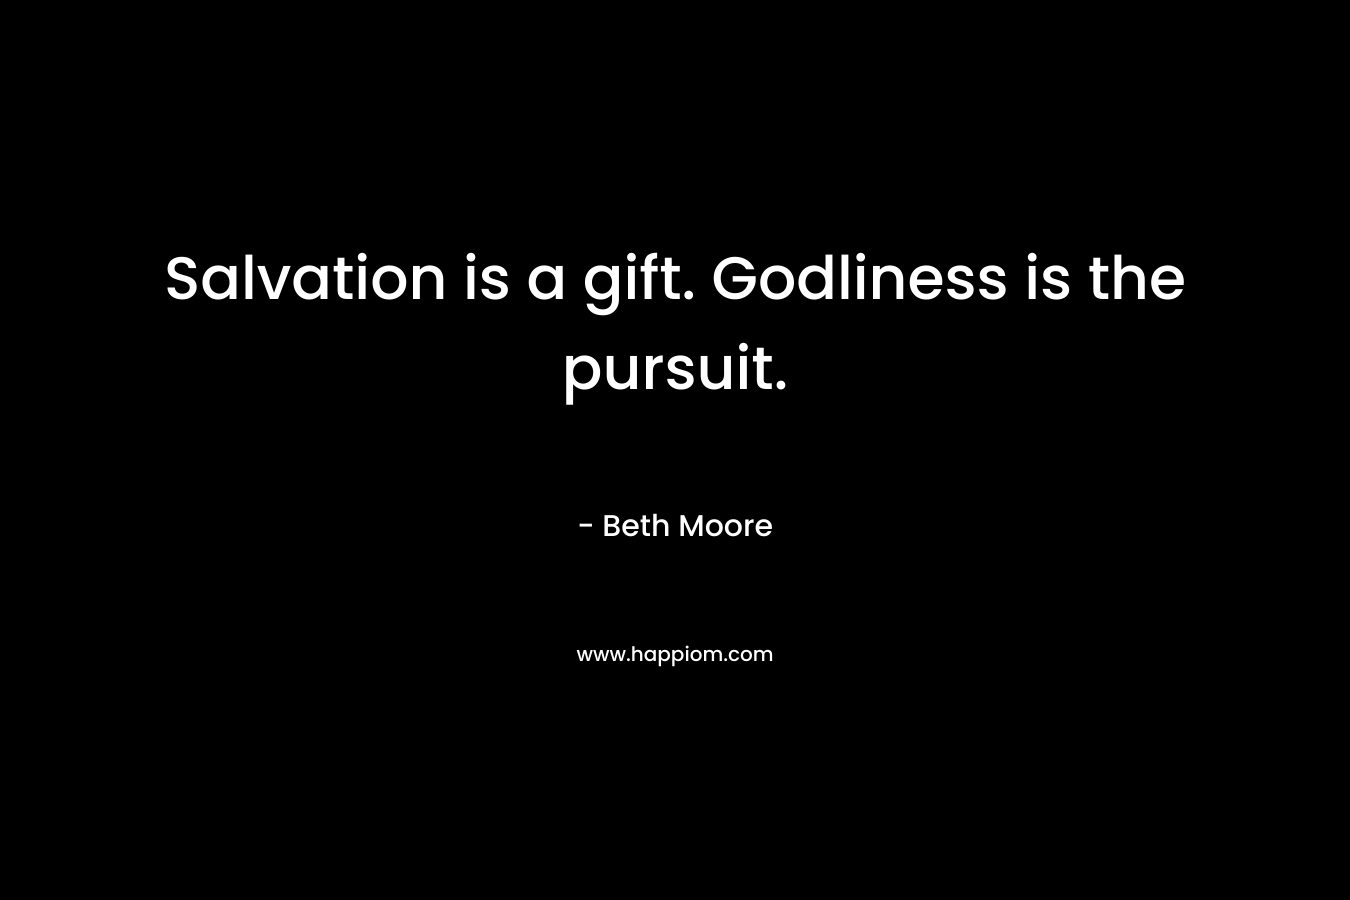 Salvation is a gift. Godliness is the pursuit. – Beth Moore